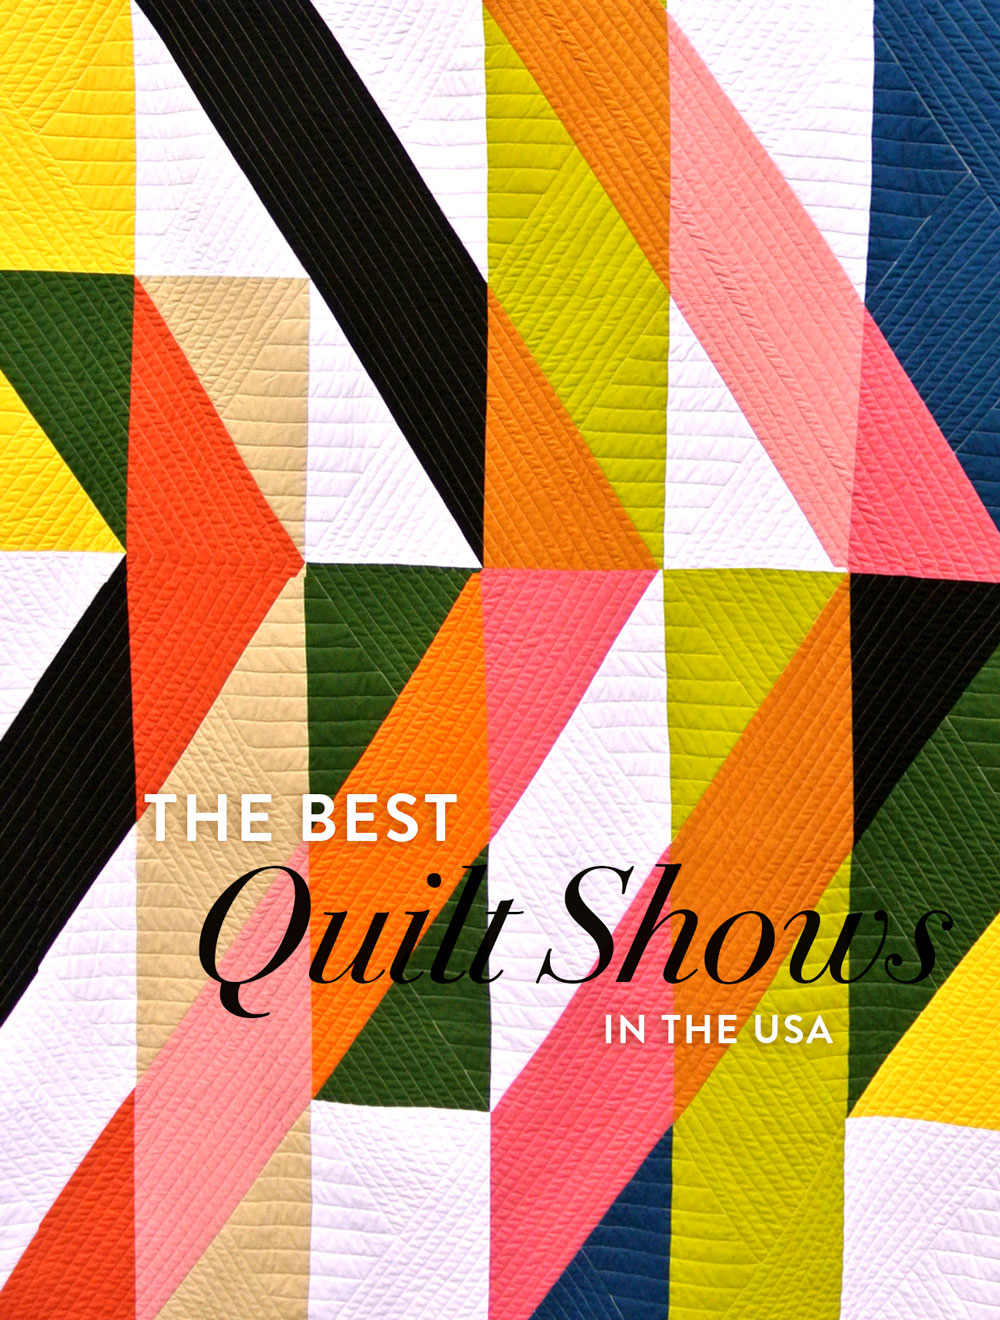 Ultimate Guide to the Best Quilt Shows in the USA | Suzy Quilts https://suzyquilts.com/best-quilt-shows-usa